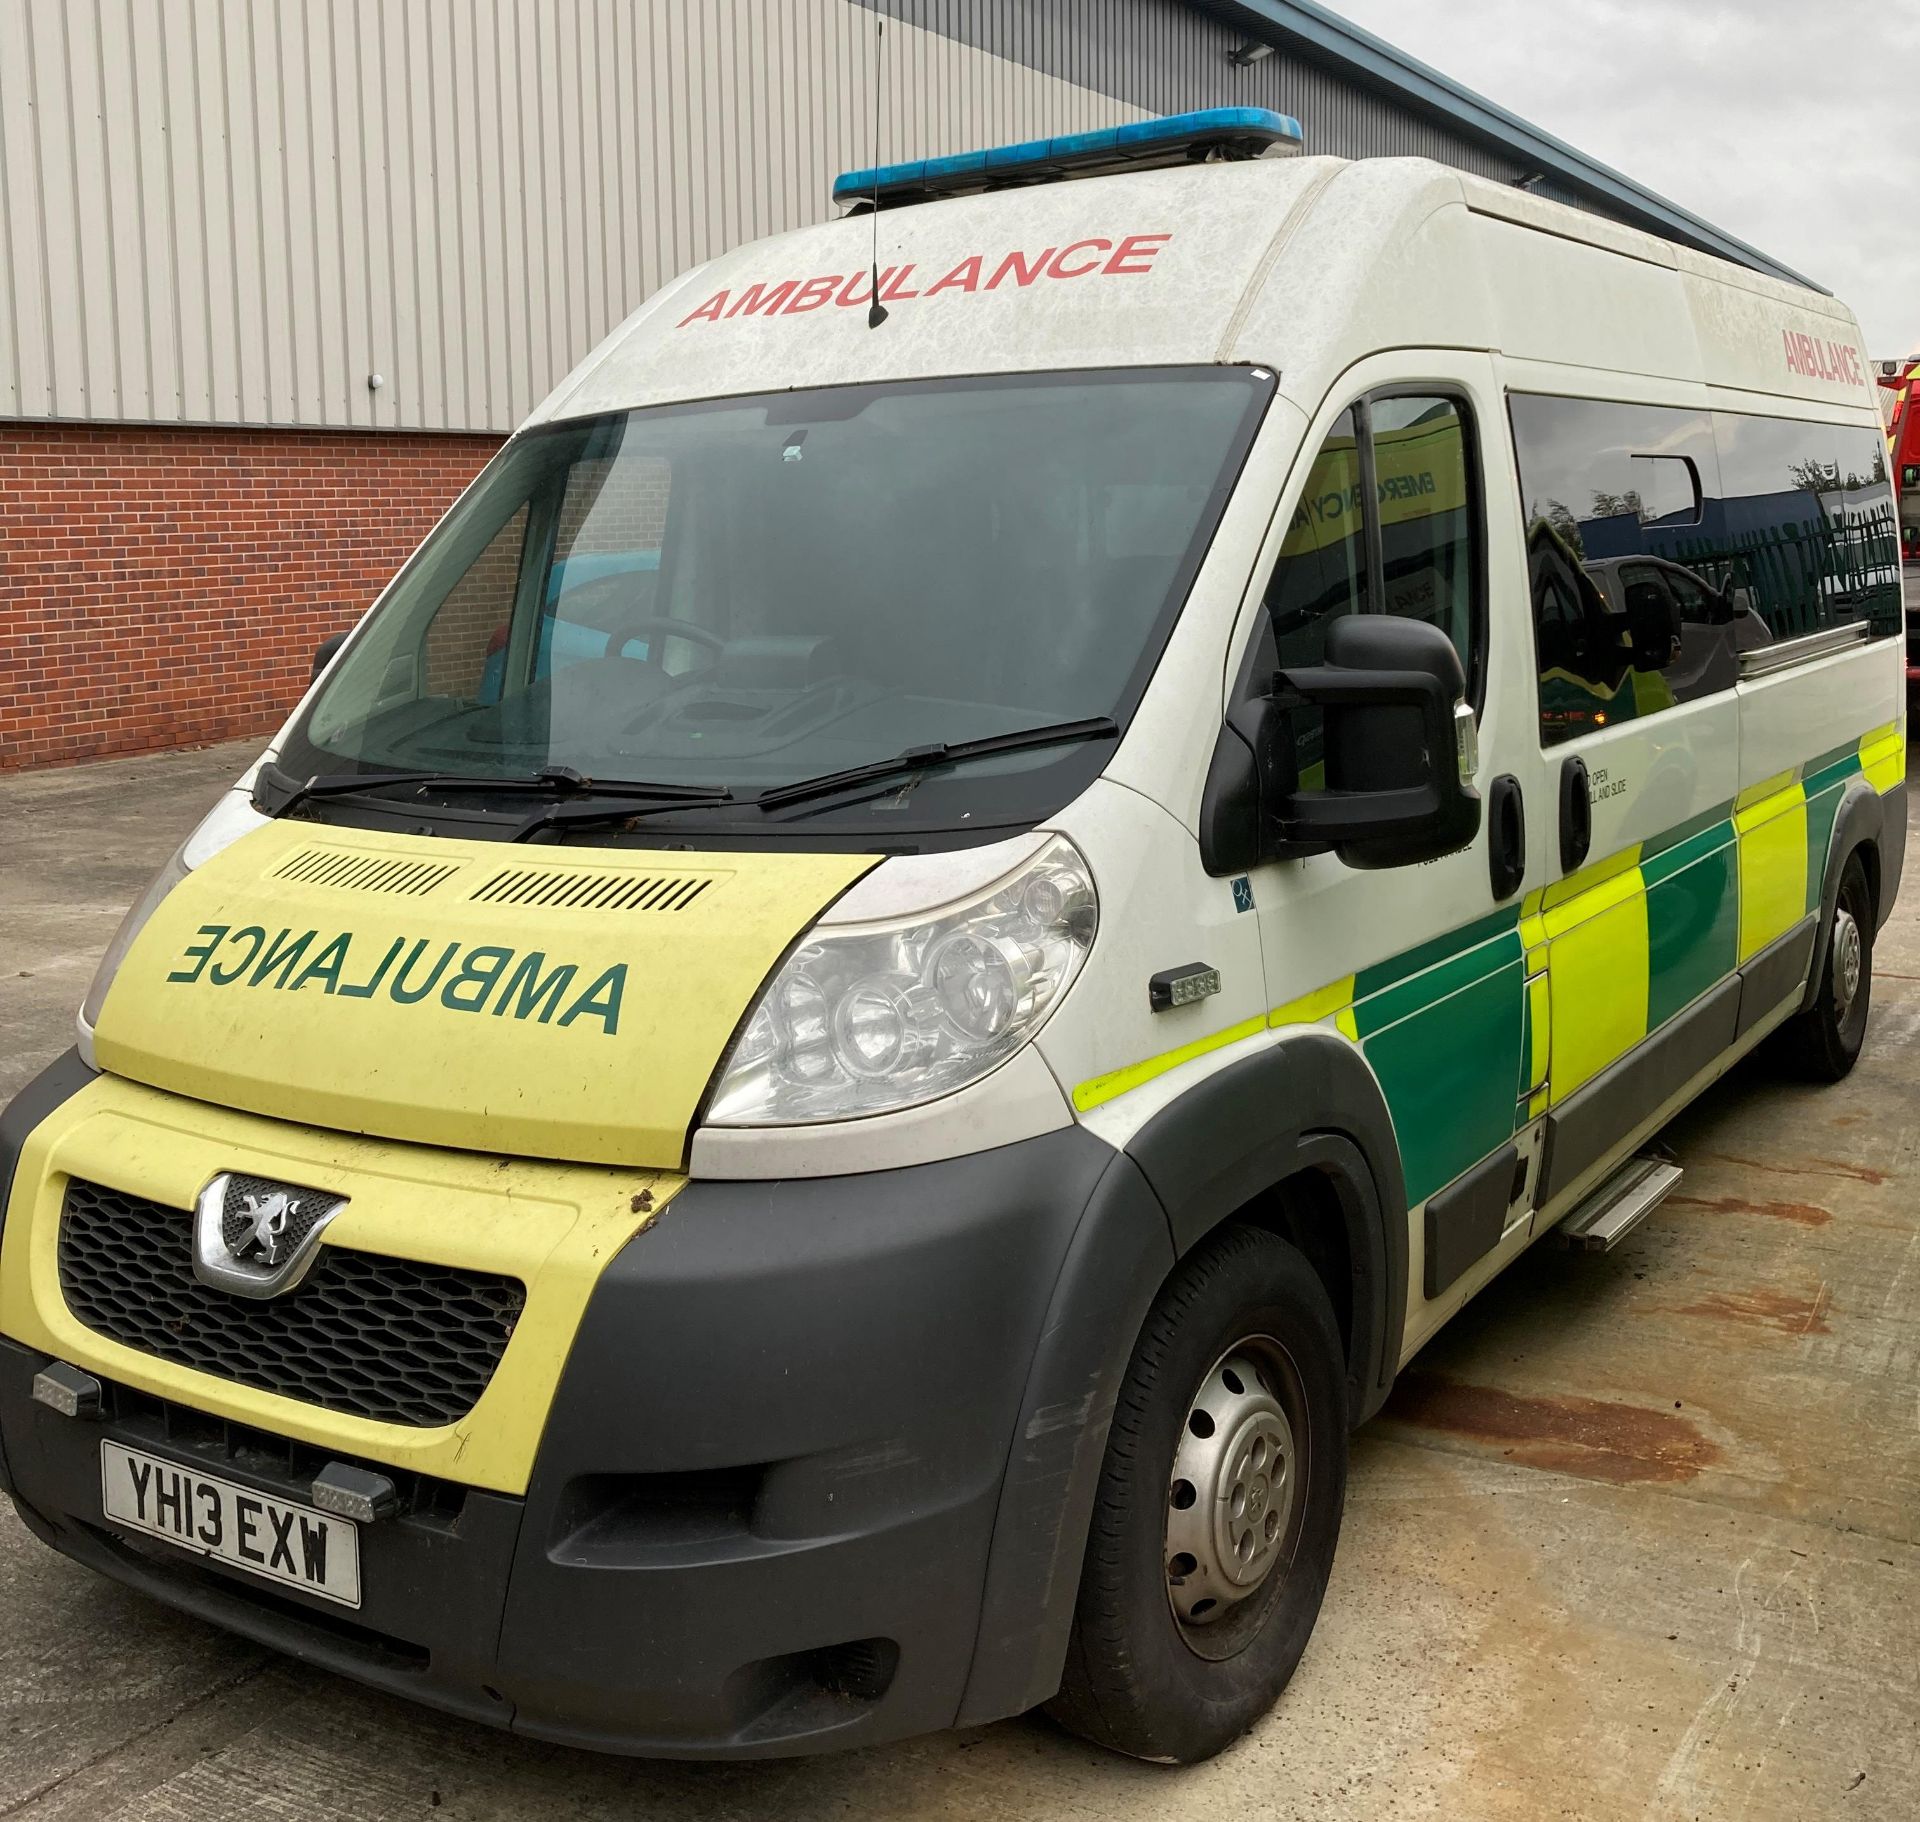 PEUGEOT BOXER 2.2 435 L3H2 HDi AMBULANCE - Diesel - White - complete with any contents. - Image 3 of 13